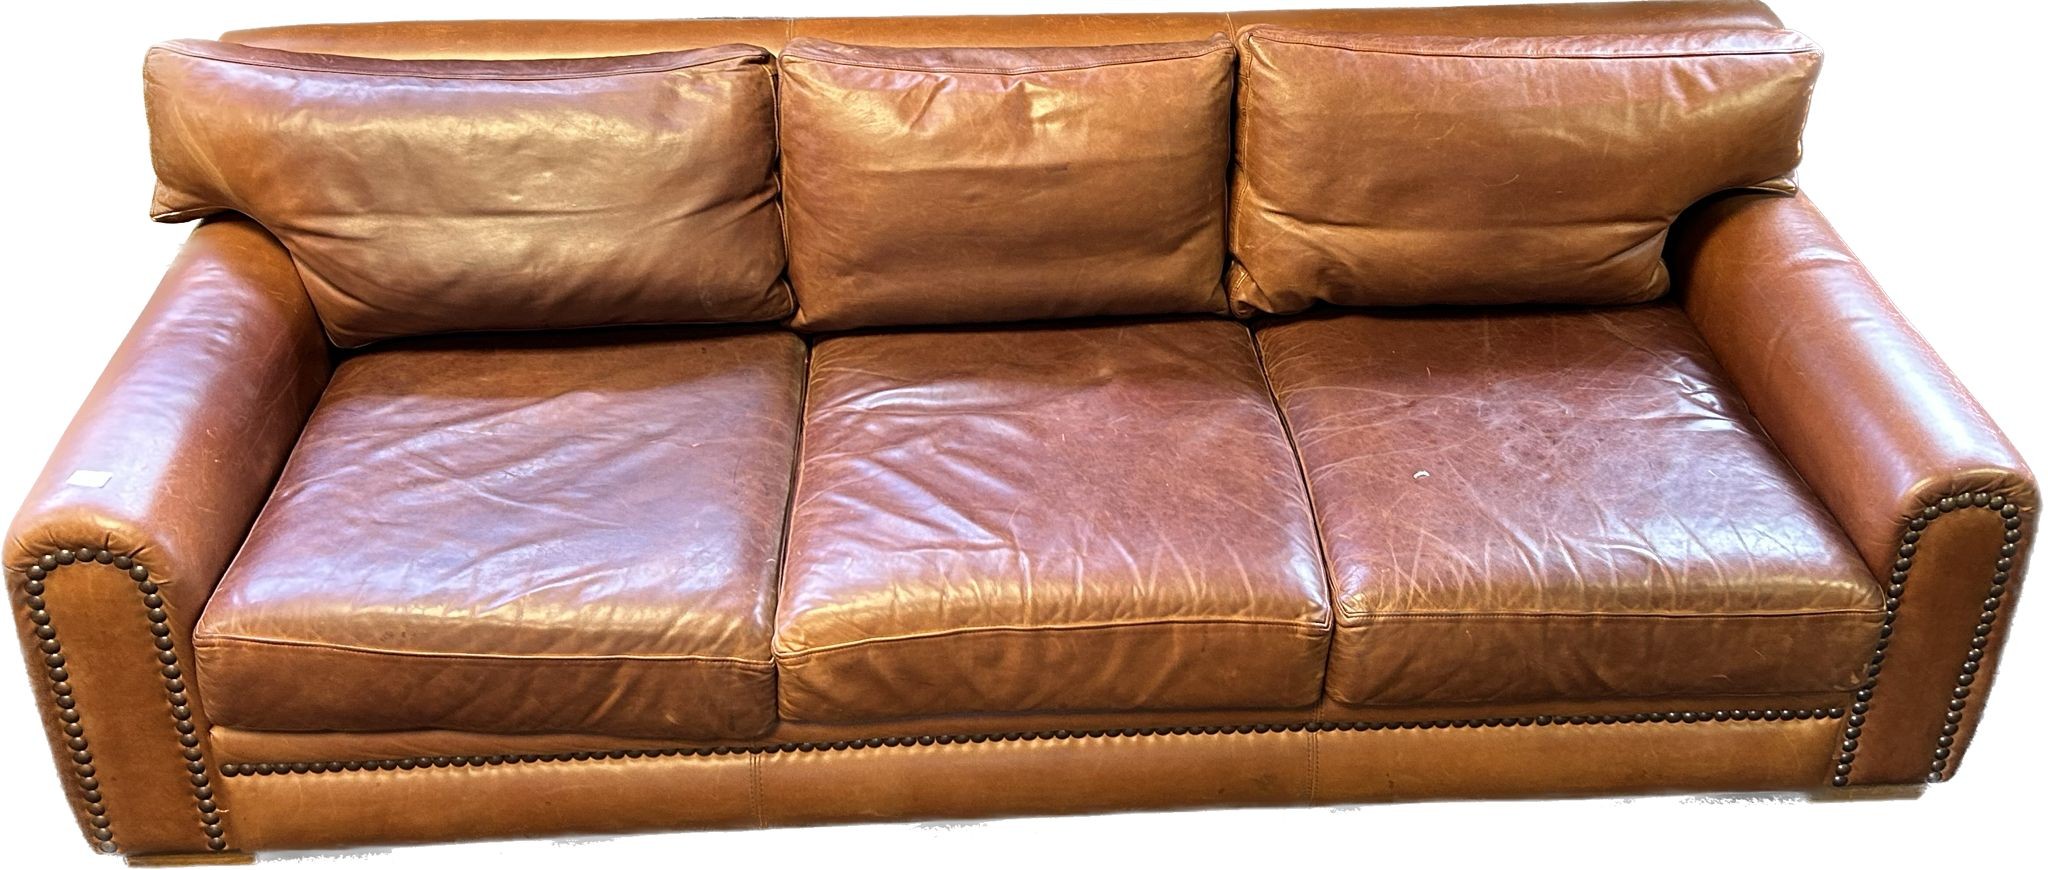 Contemporary tan leather 3 seat settee with brass nail head trim - Image 3 of 3